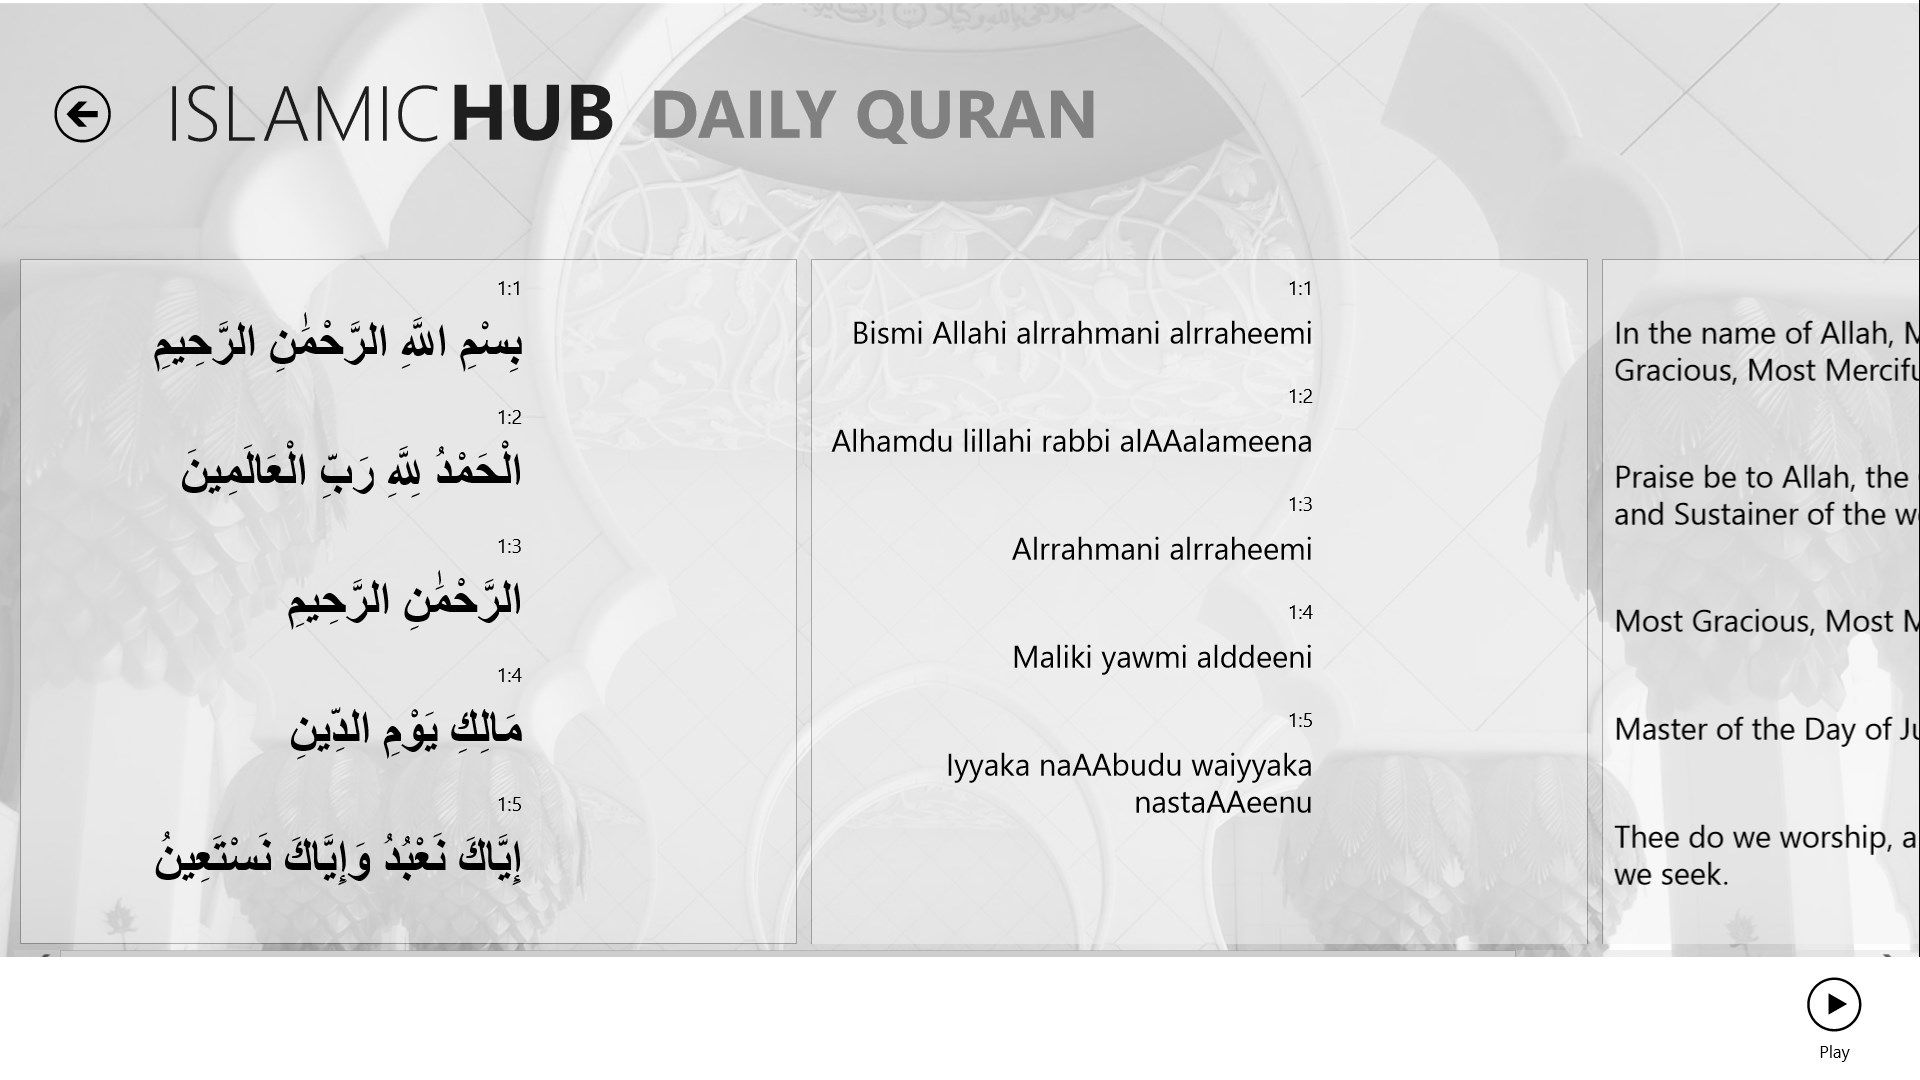 Daily few verses from the Quran. Continues from the last day.